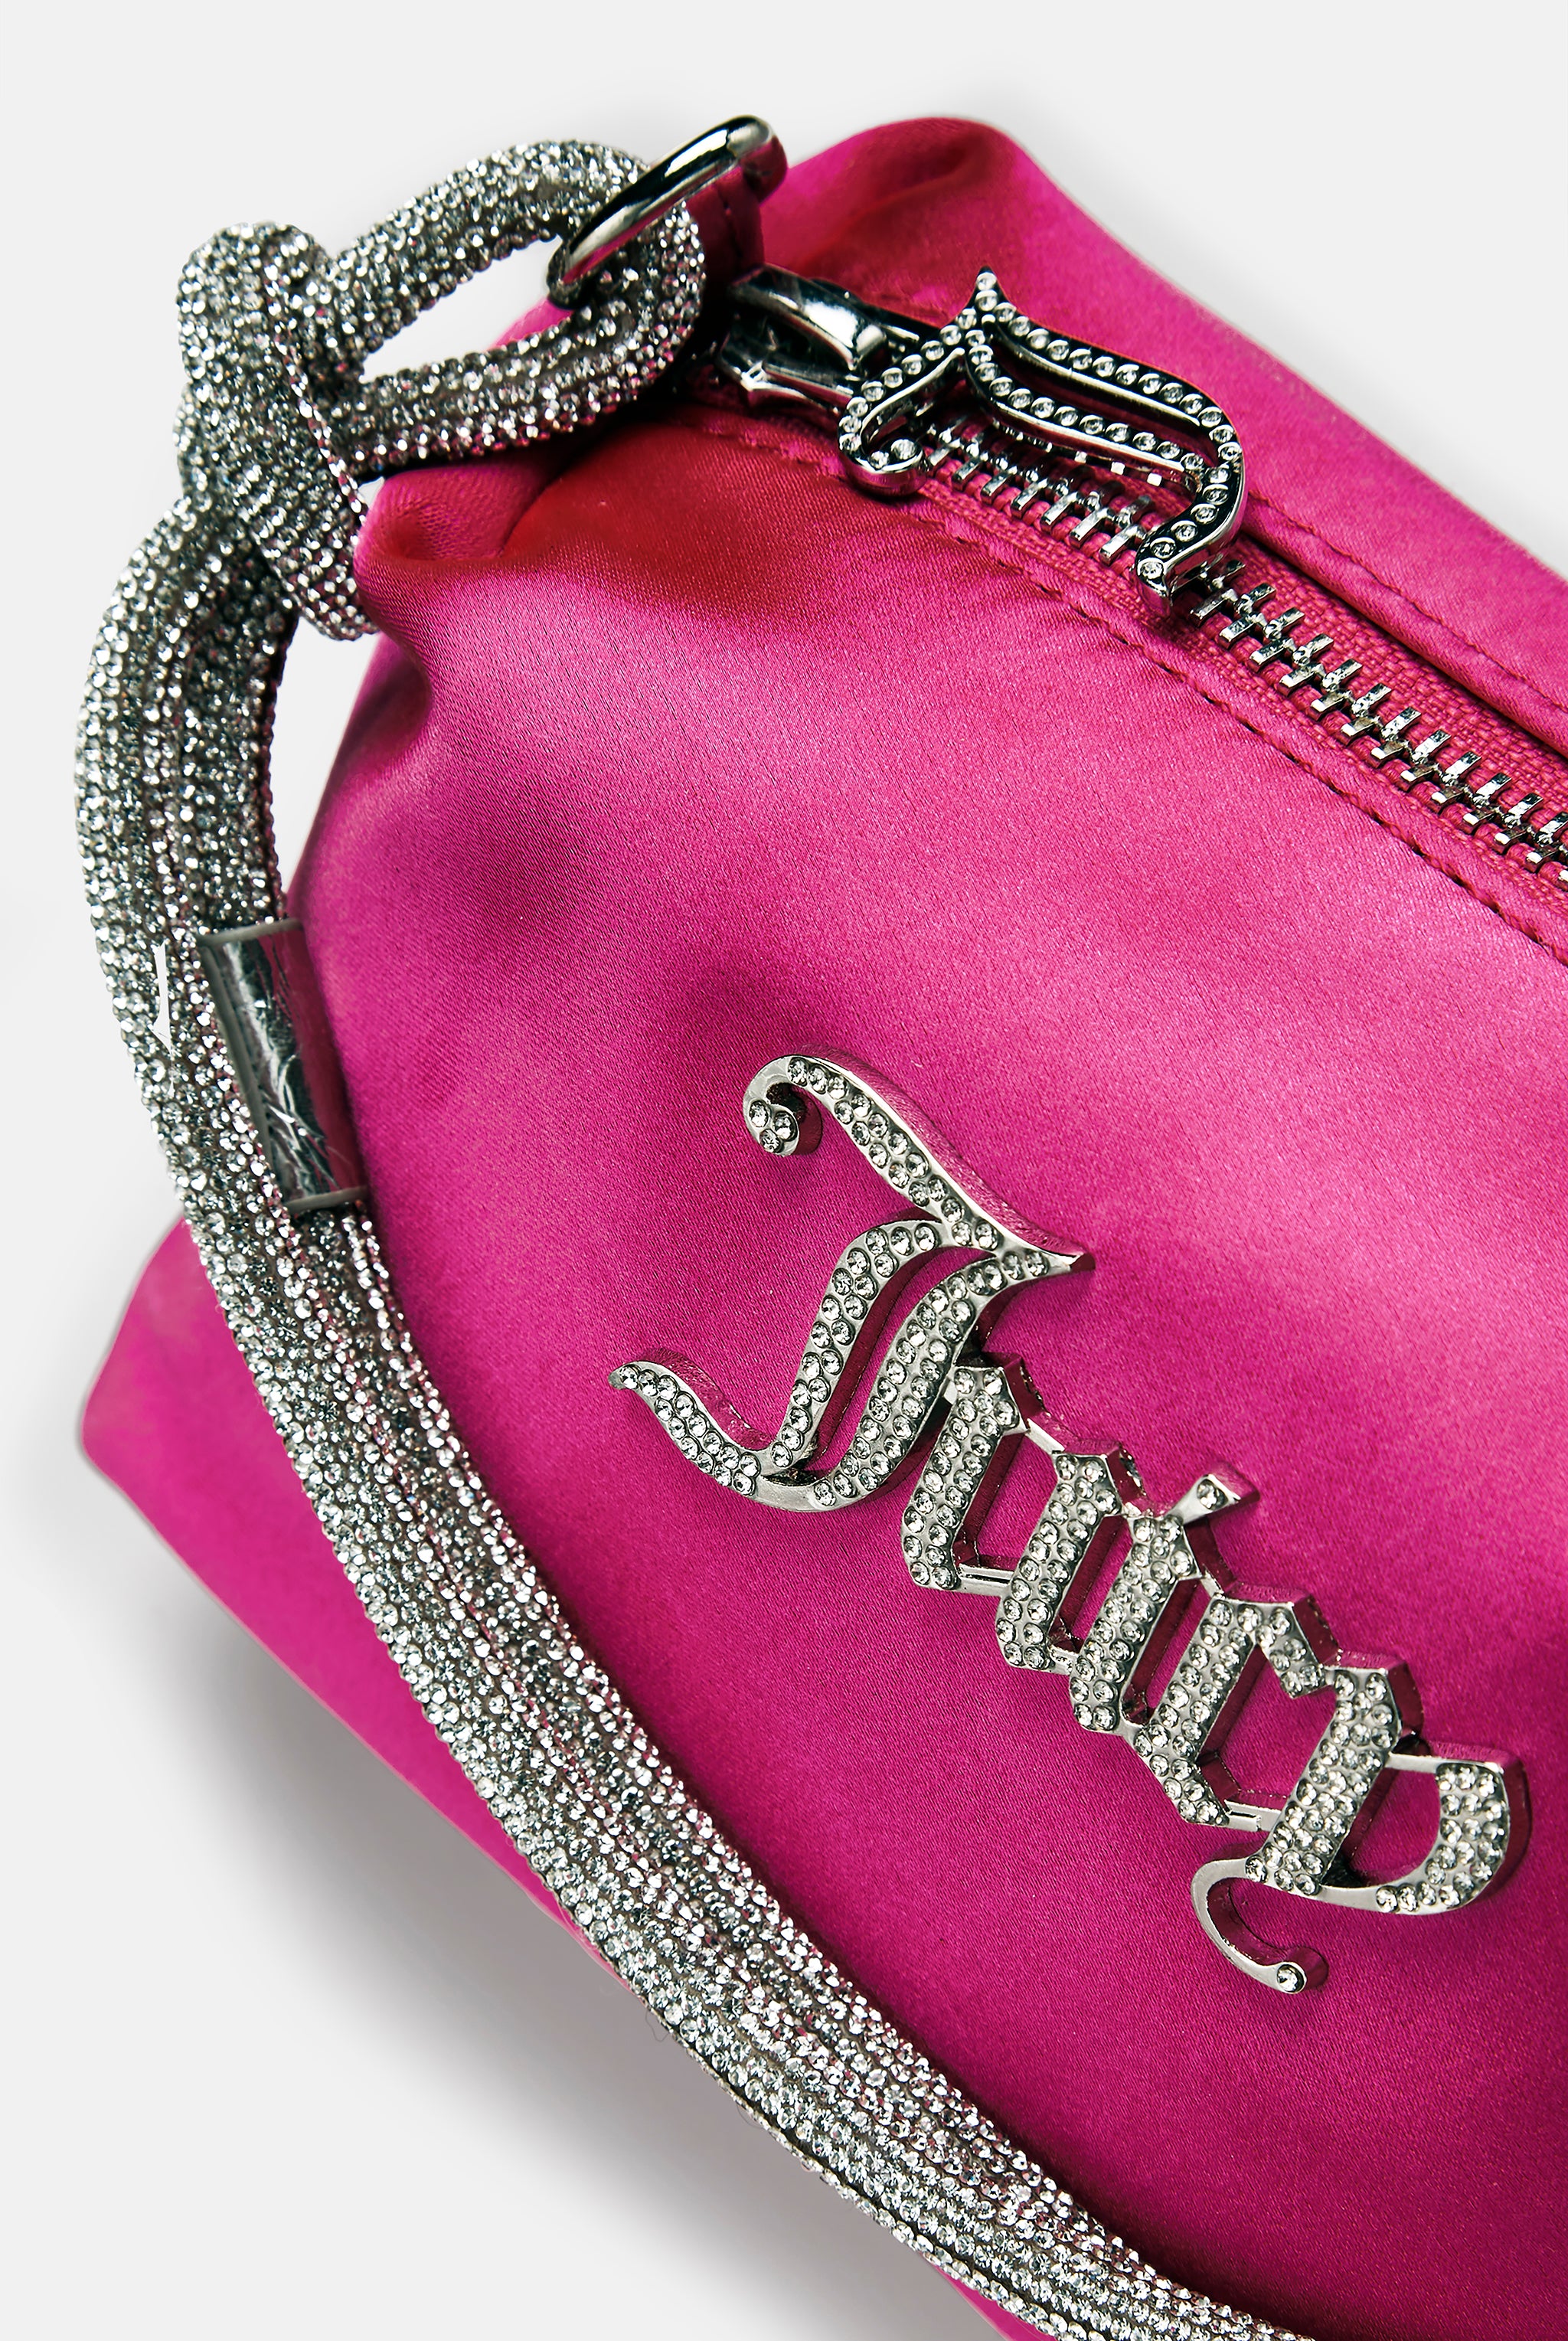 JUICY COUTURE HOT Pink Eau De Couture Tote Bag Fully Lined Gold Accents  £21.73 - PicClick UK